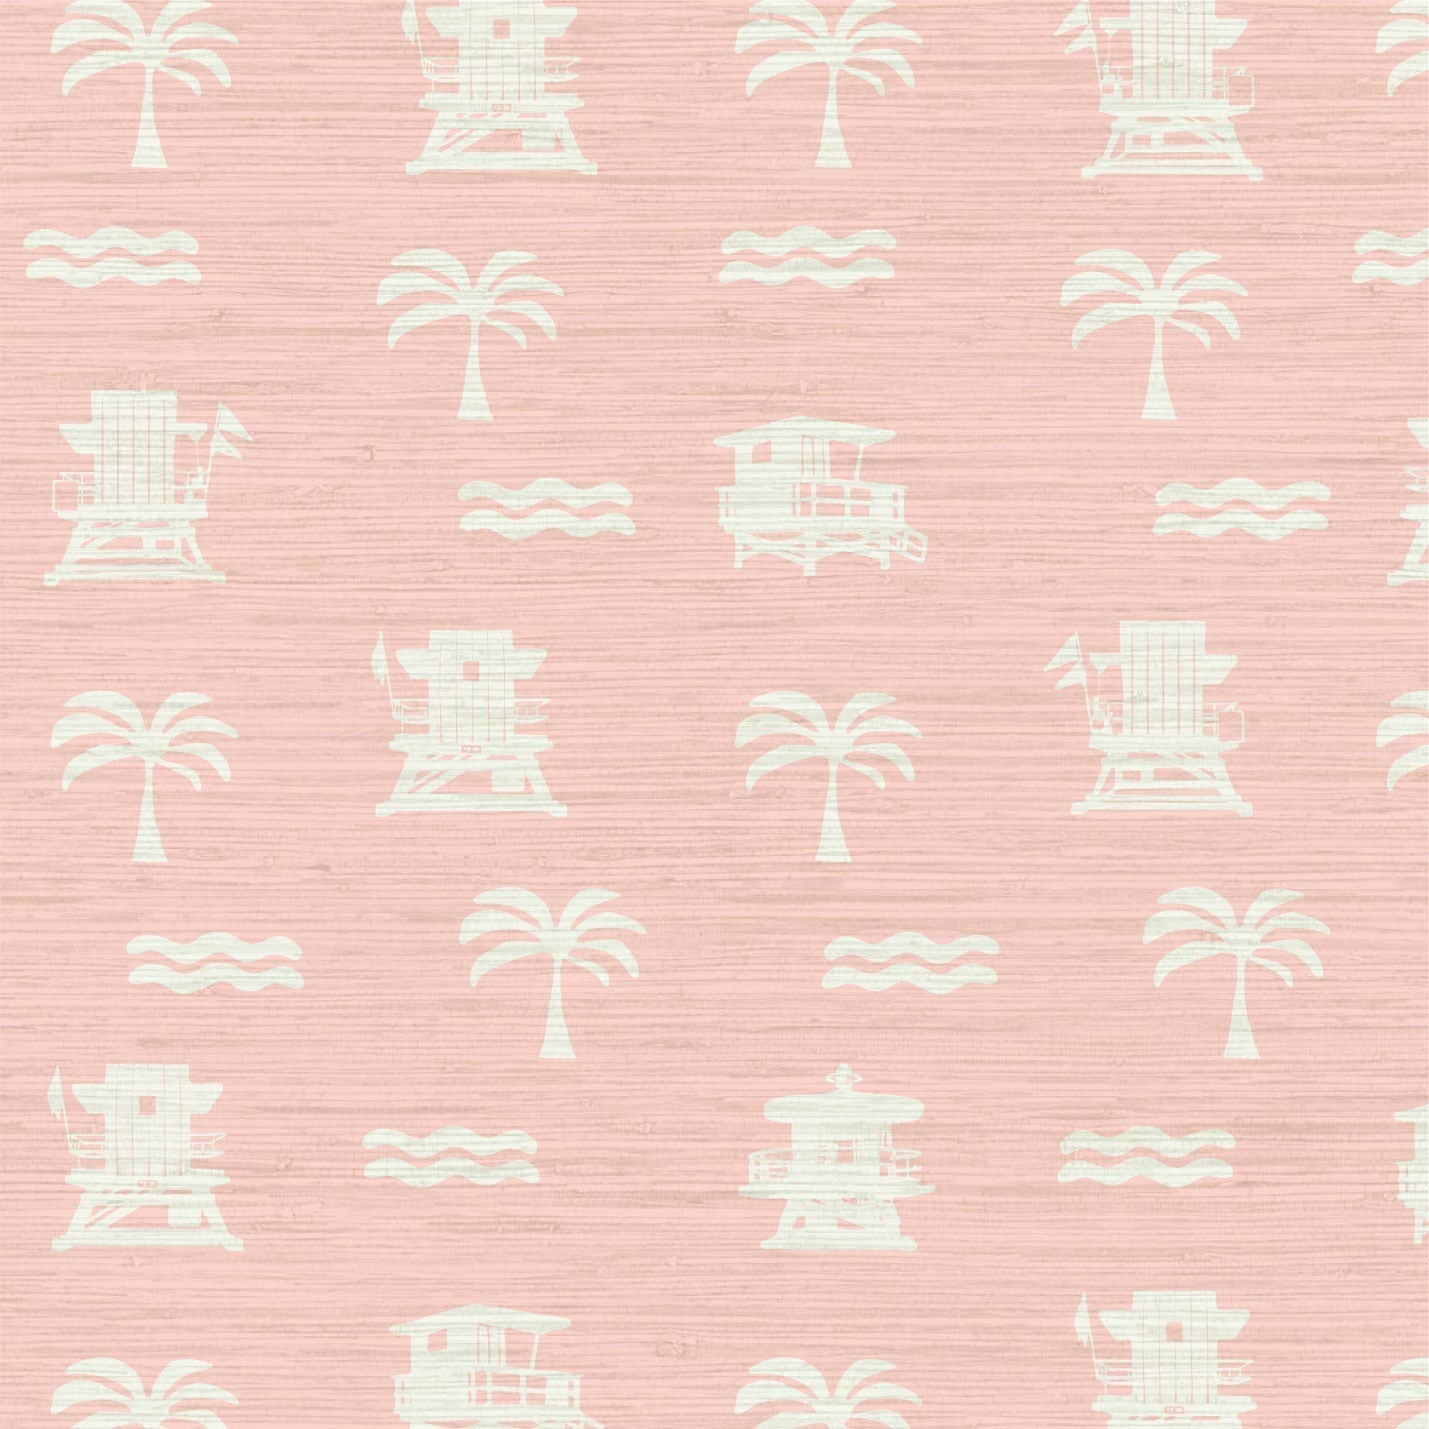 Grasscloth Natural Textured Eco-Friendly Non-toxic High-quality Sustainable practices Sustainability Interior Design Wall covering wallpaper grid seaside coastal seashore waterfront vacation home styling retreat relaxed beach vibes beach cottage shoreline oceanfront nautical tropical ocean waves palm tree lifeguard stand mini print custom interior design beach house white light pink baby